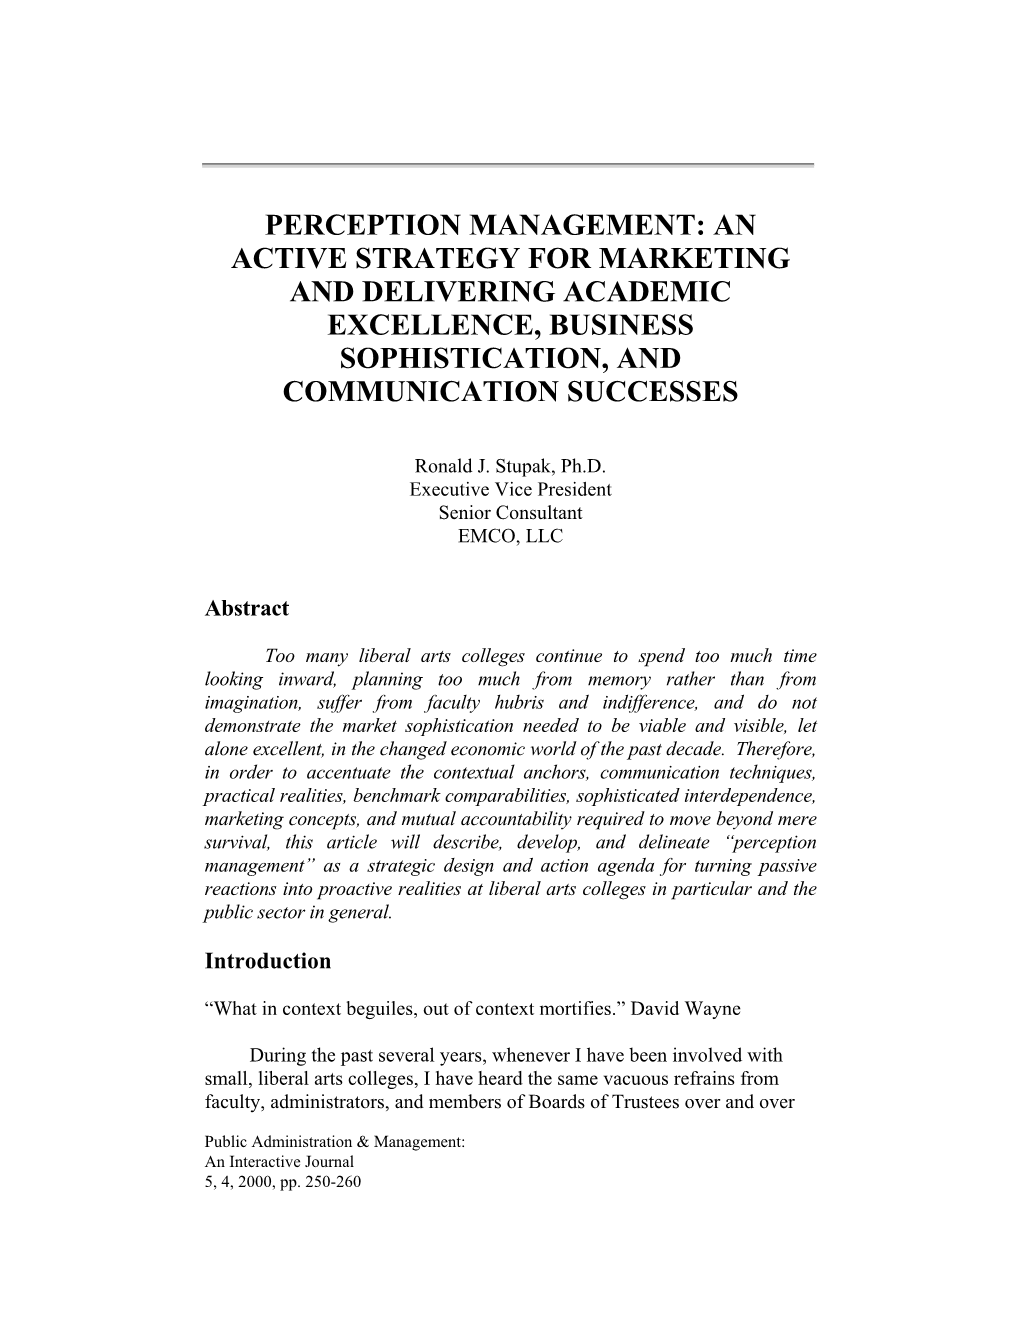 Perception Management: an Active Strategy for Marketing and Delivering Academic Excellence, Business Sophistication, and Communication Successes